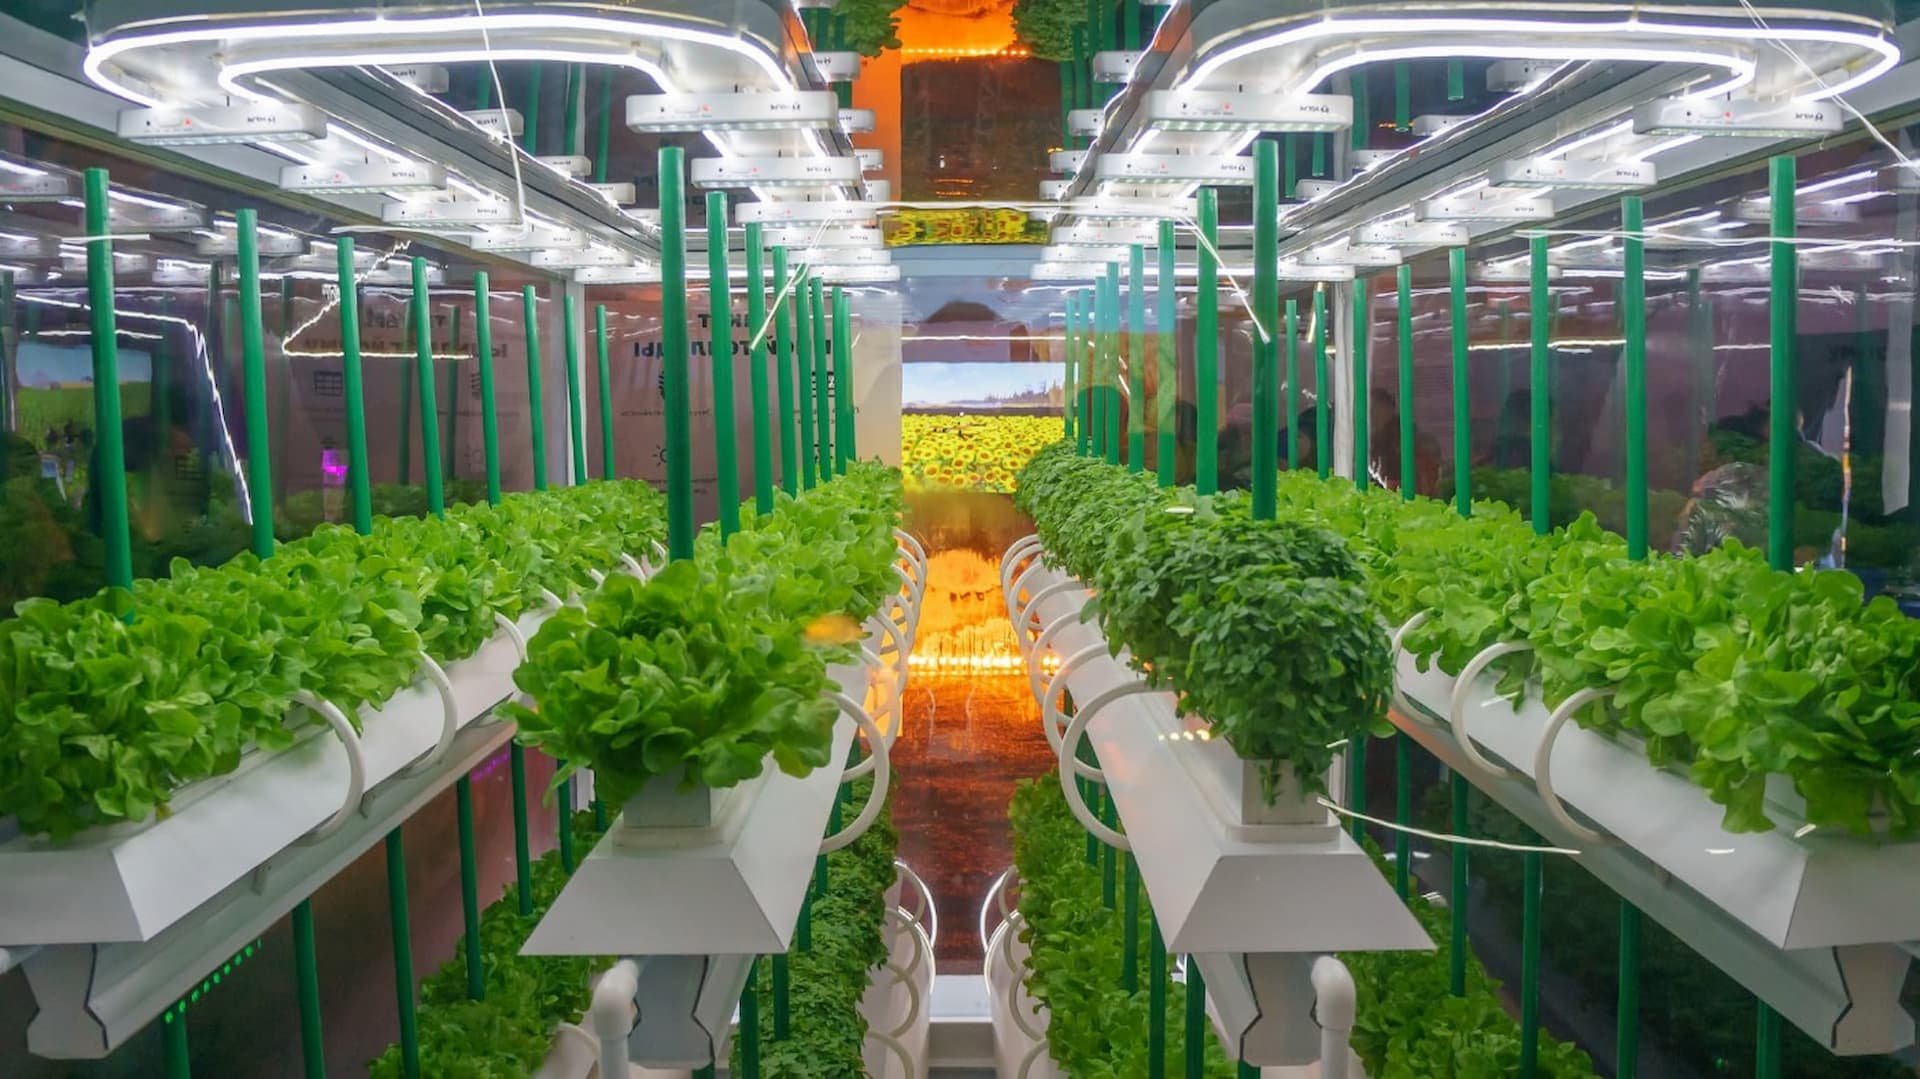 % Many believe Hydroponics is Expensive, Difficult to Use, get Less Nutritious Than Other Plants, Hard to Maintain and, Hydroponics is not Organic. Here, those common myths are debunked.